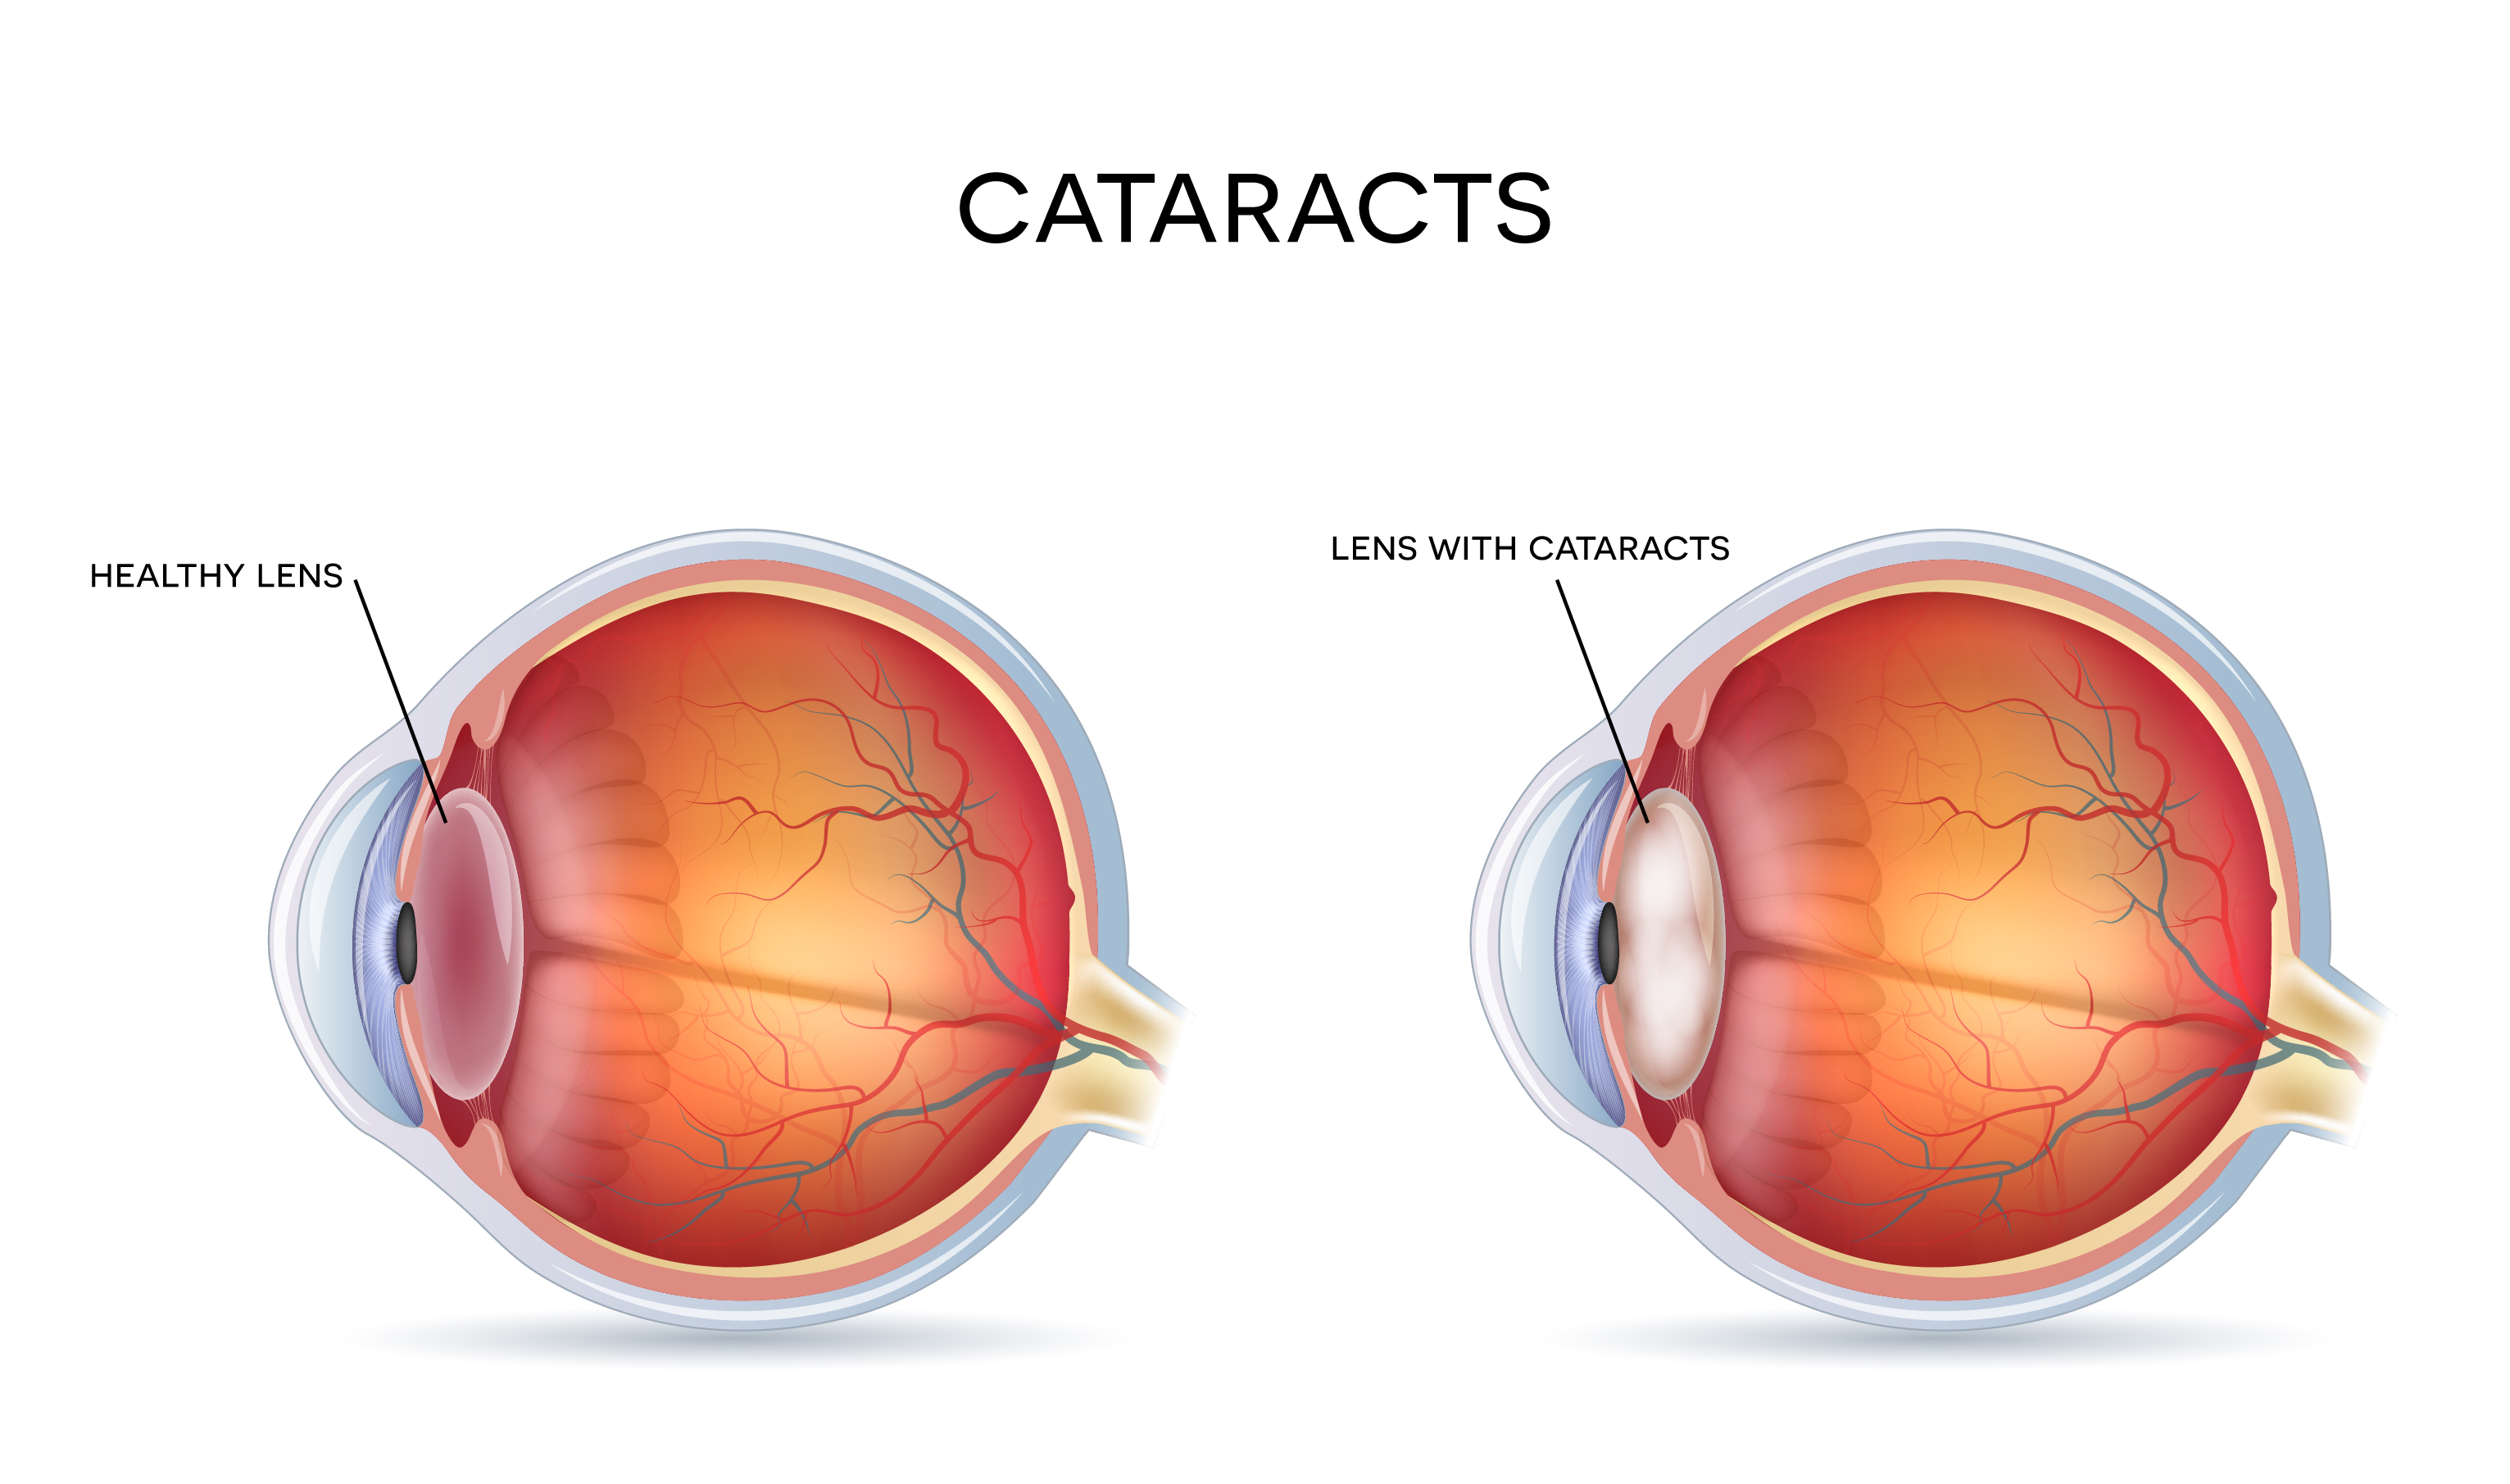 Side view image of cataracts in an eye